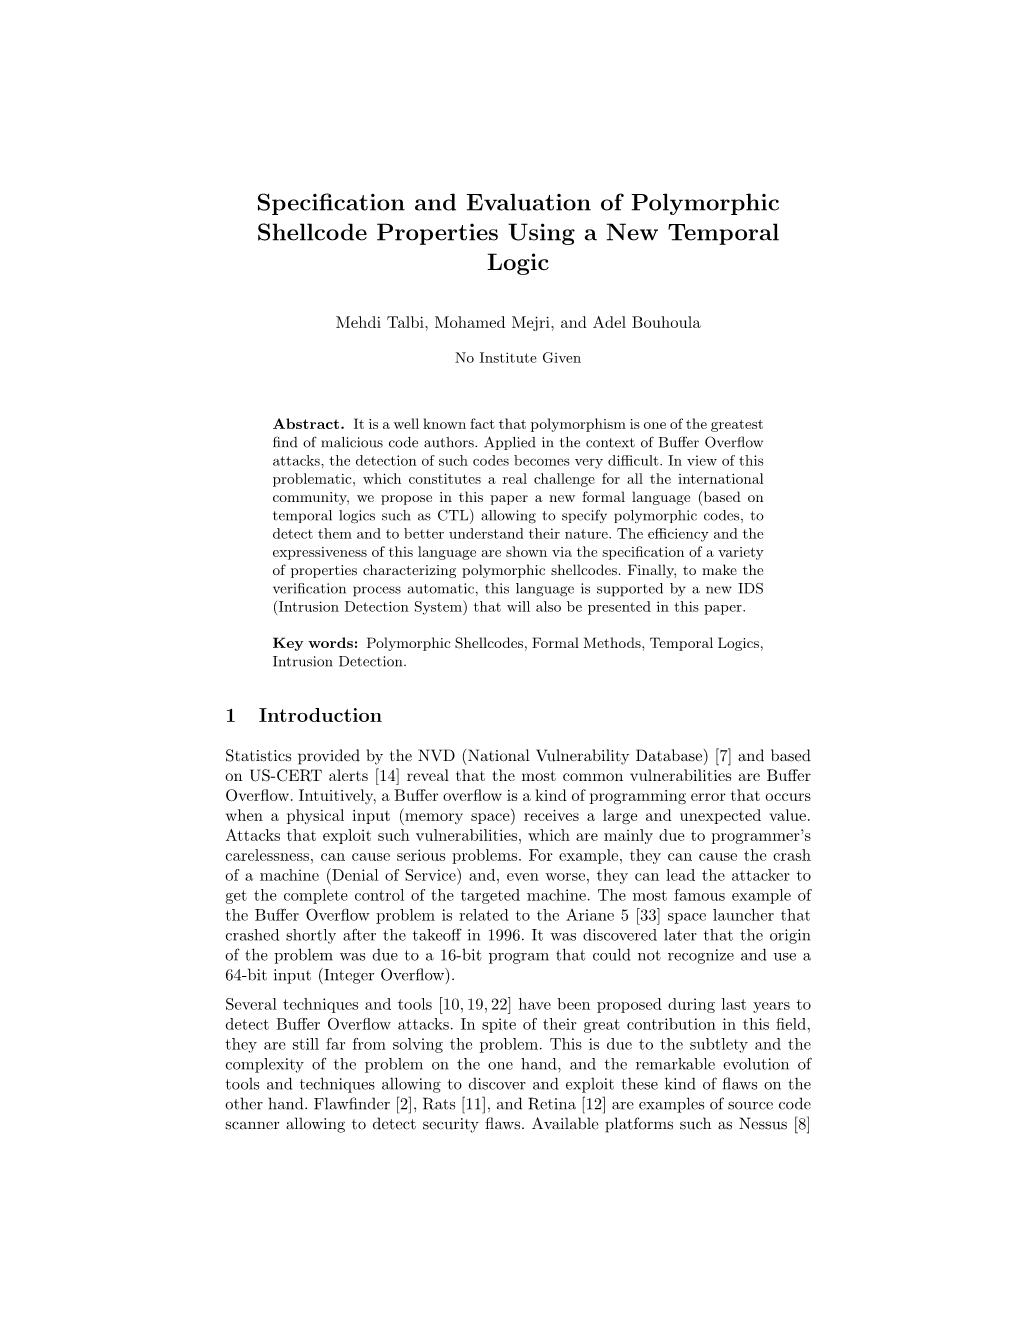 Specification and Evaluation of Polymorphic Shellcode Properties